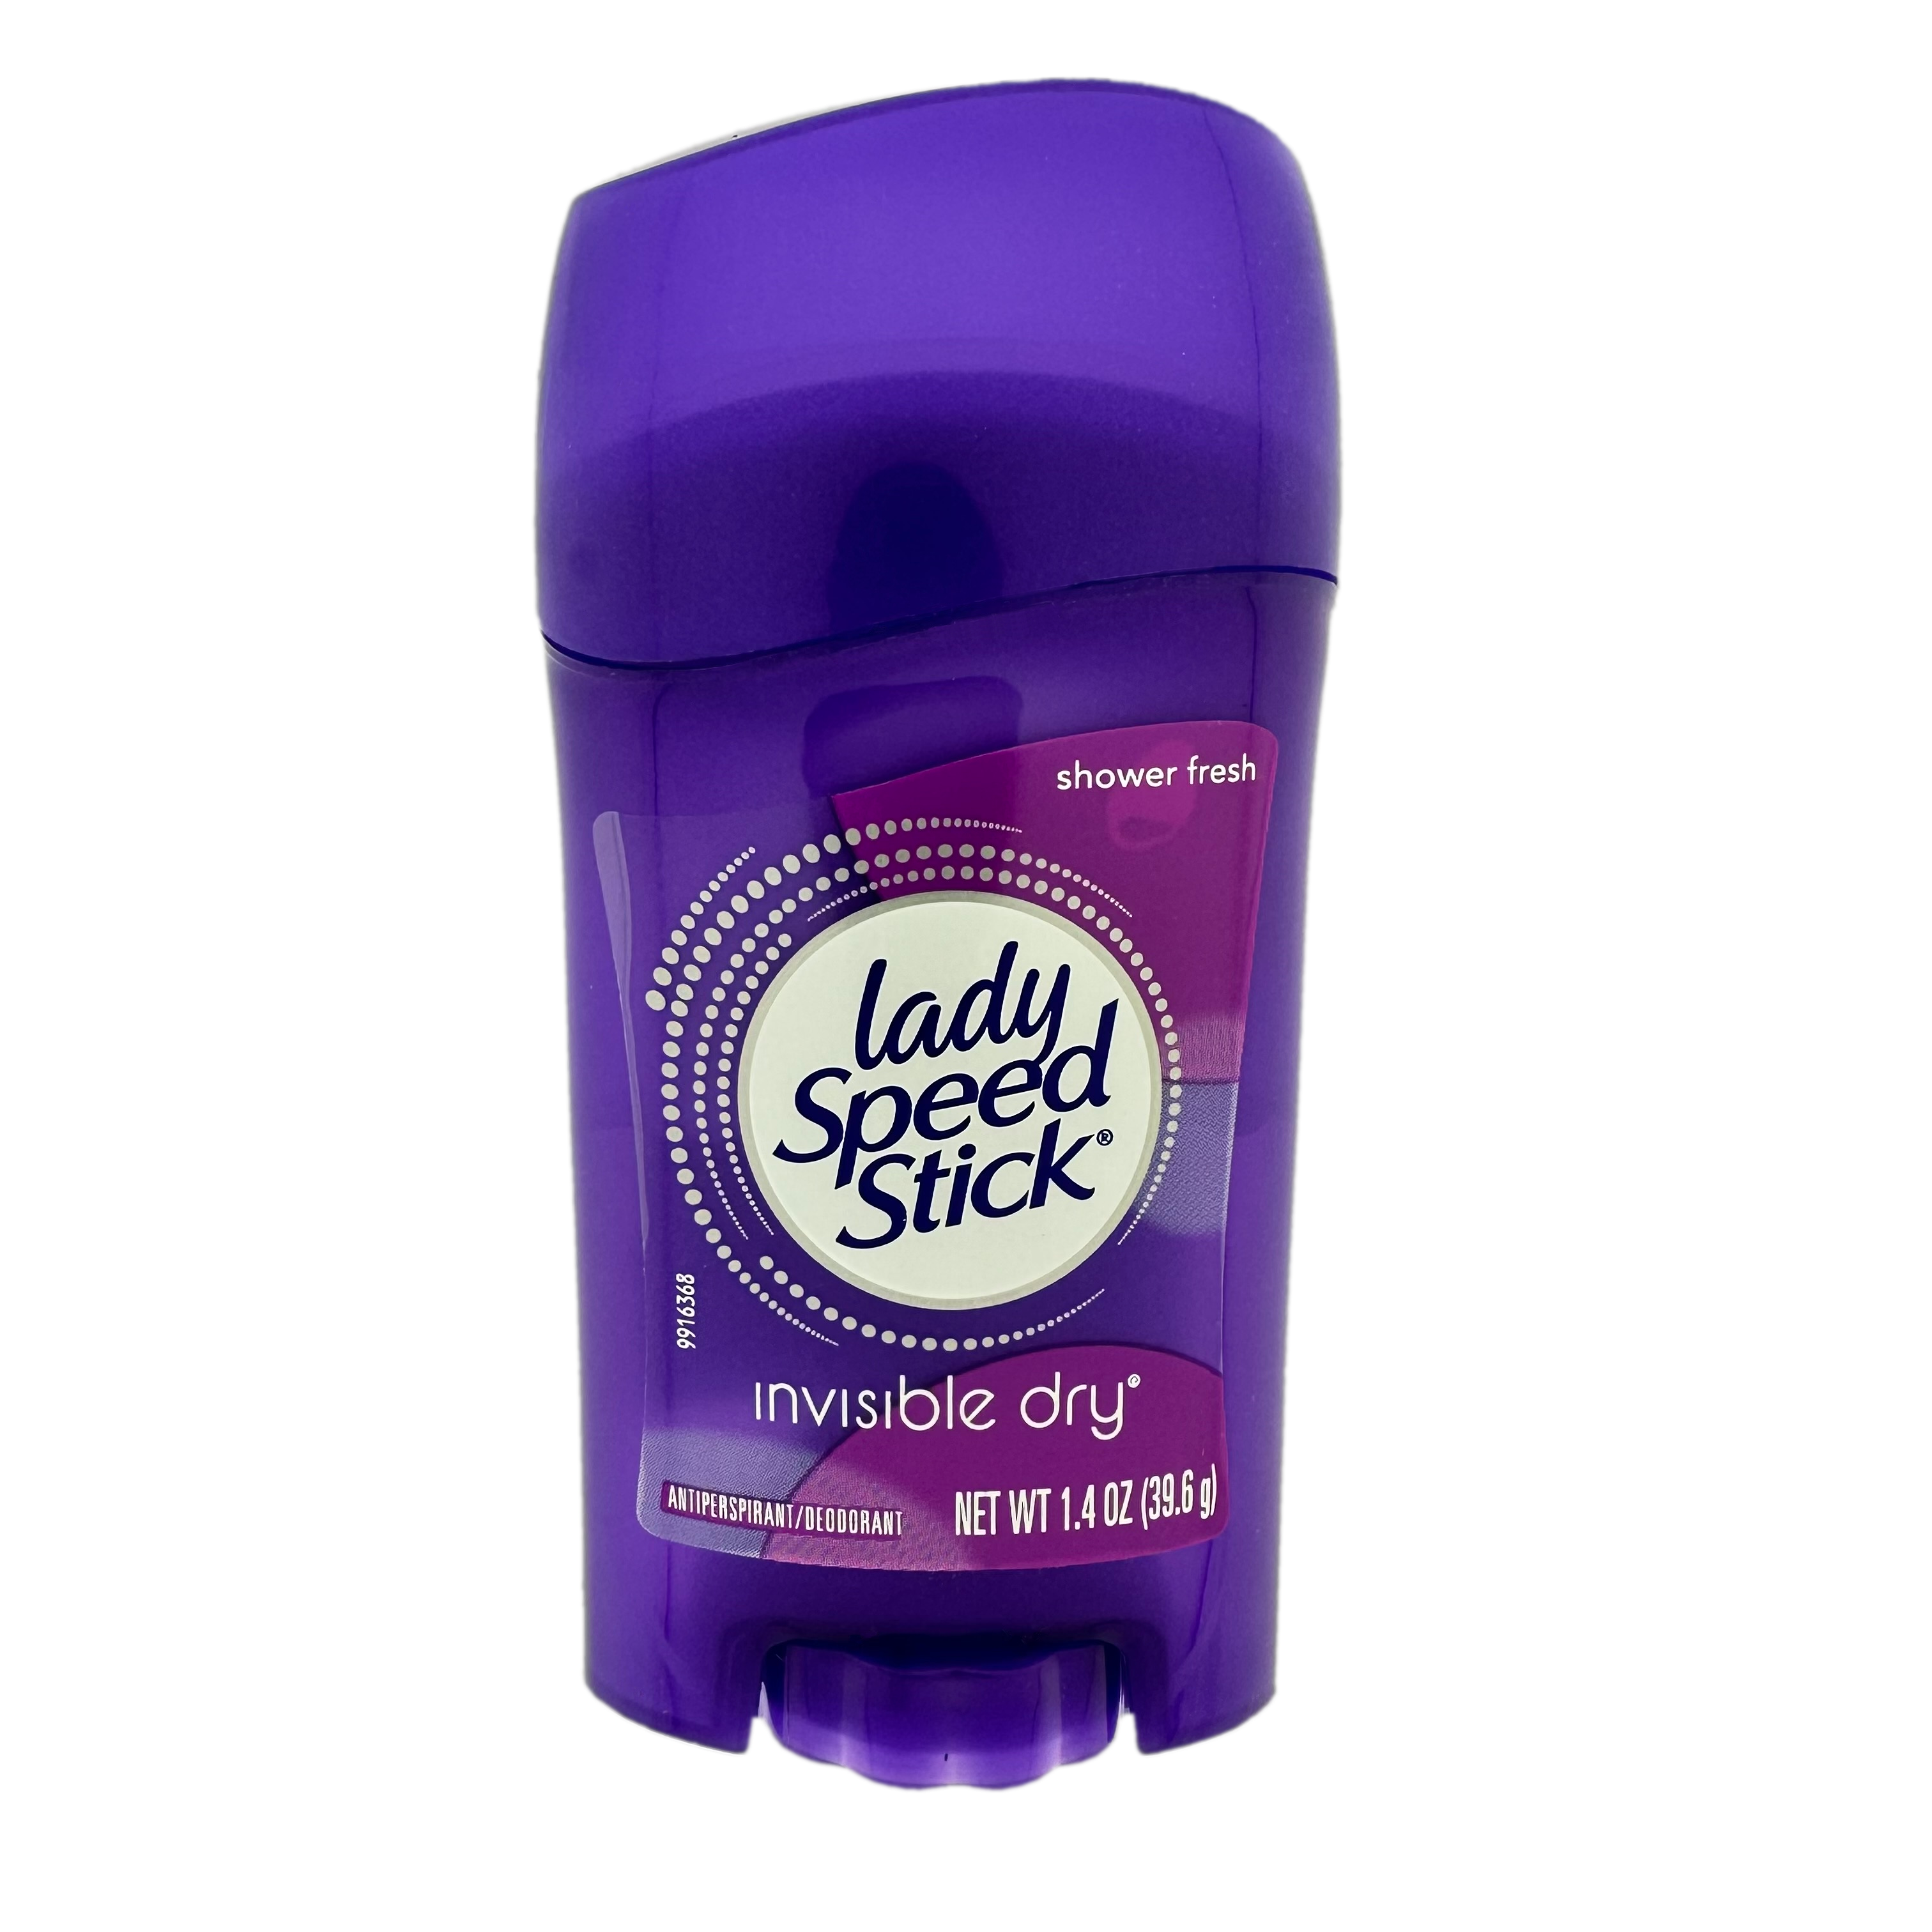 Lady Speed Stick Invisible Dry Shower Fresh deodorant stick 39.6g